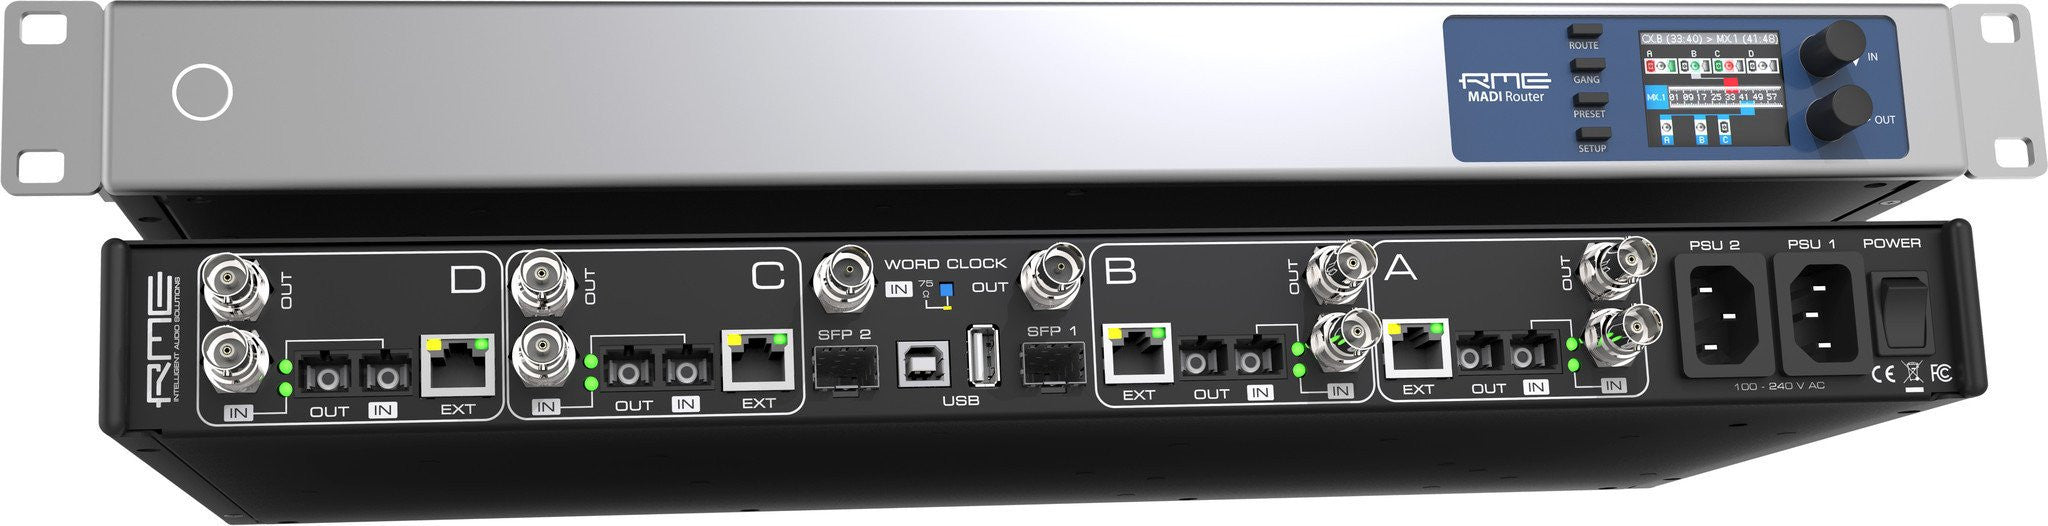 RME MADI Router 12-Port